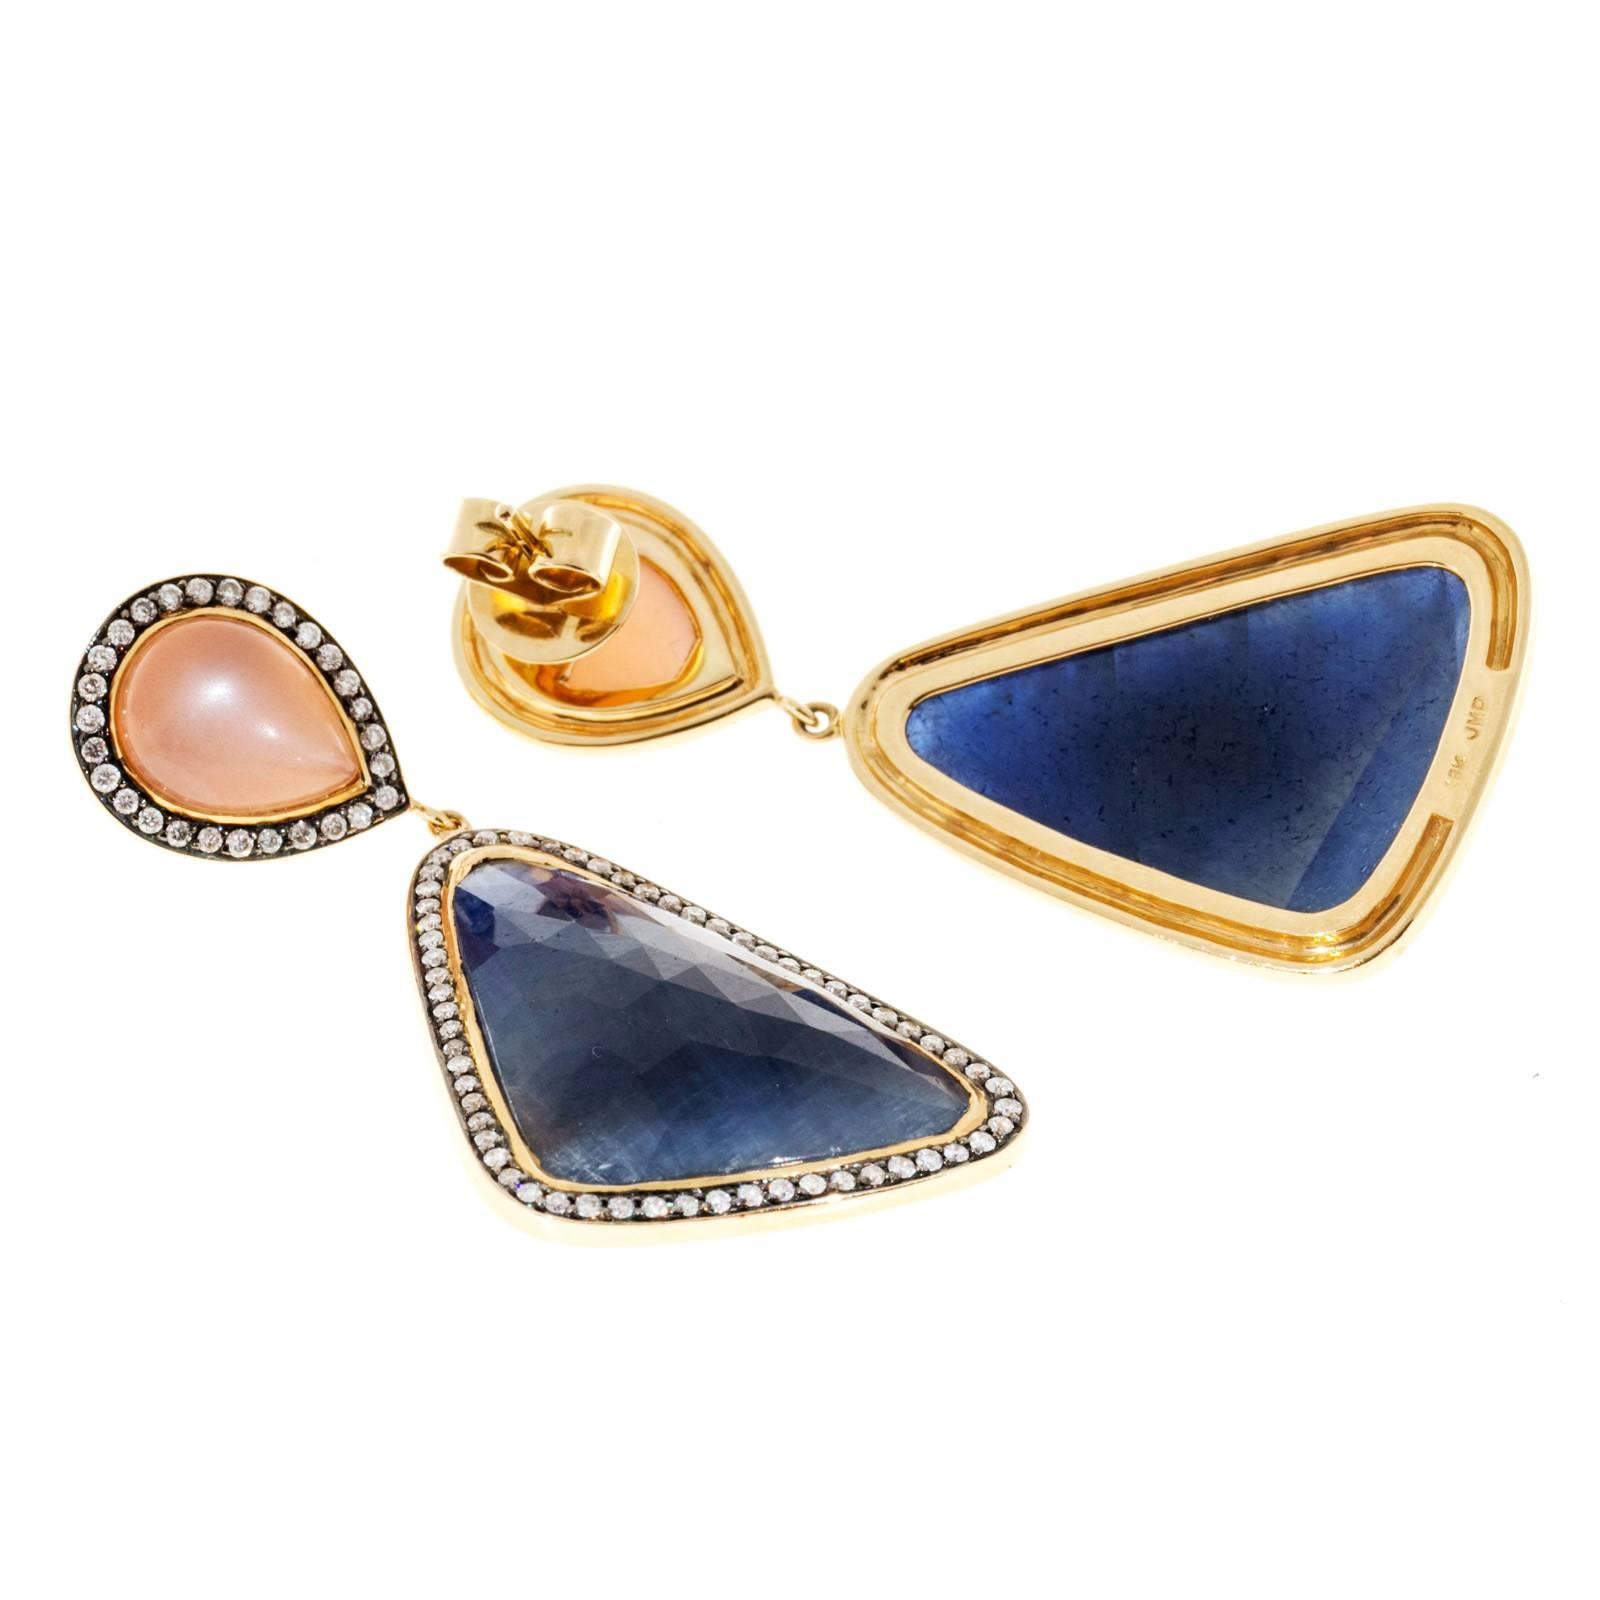  Designer 18k yellow gold dangle earrings with peach Moonstones and rose cut Sapphire slices from the designer JMP, surrounded by full cut diamonds. 

2 custom cut Sapphires, approx. total weight 12.00cts, 24.80 x 17.12 x 4.69mm 
2 pear cabochon